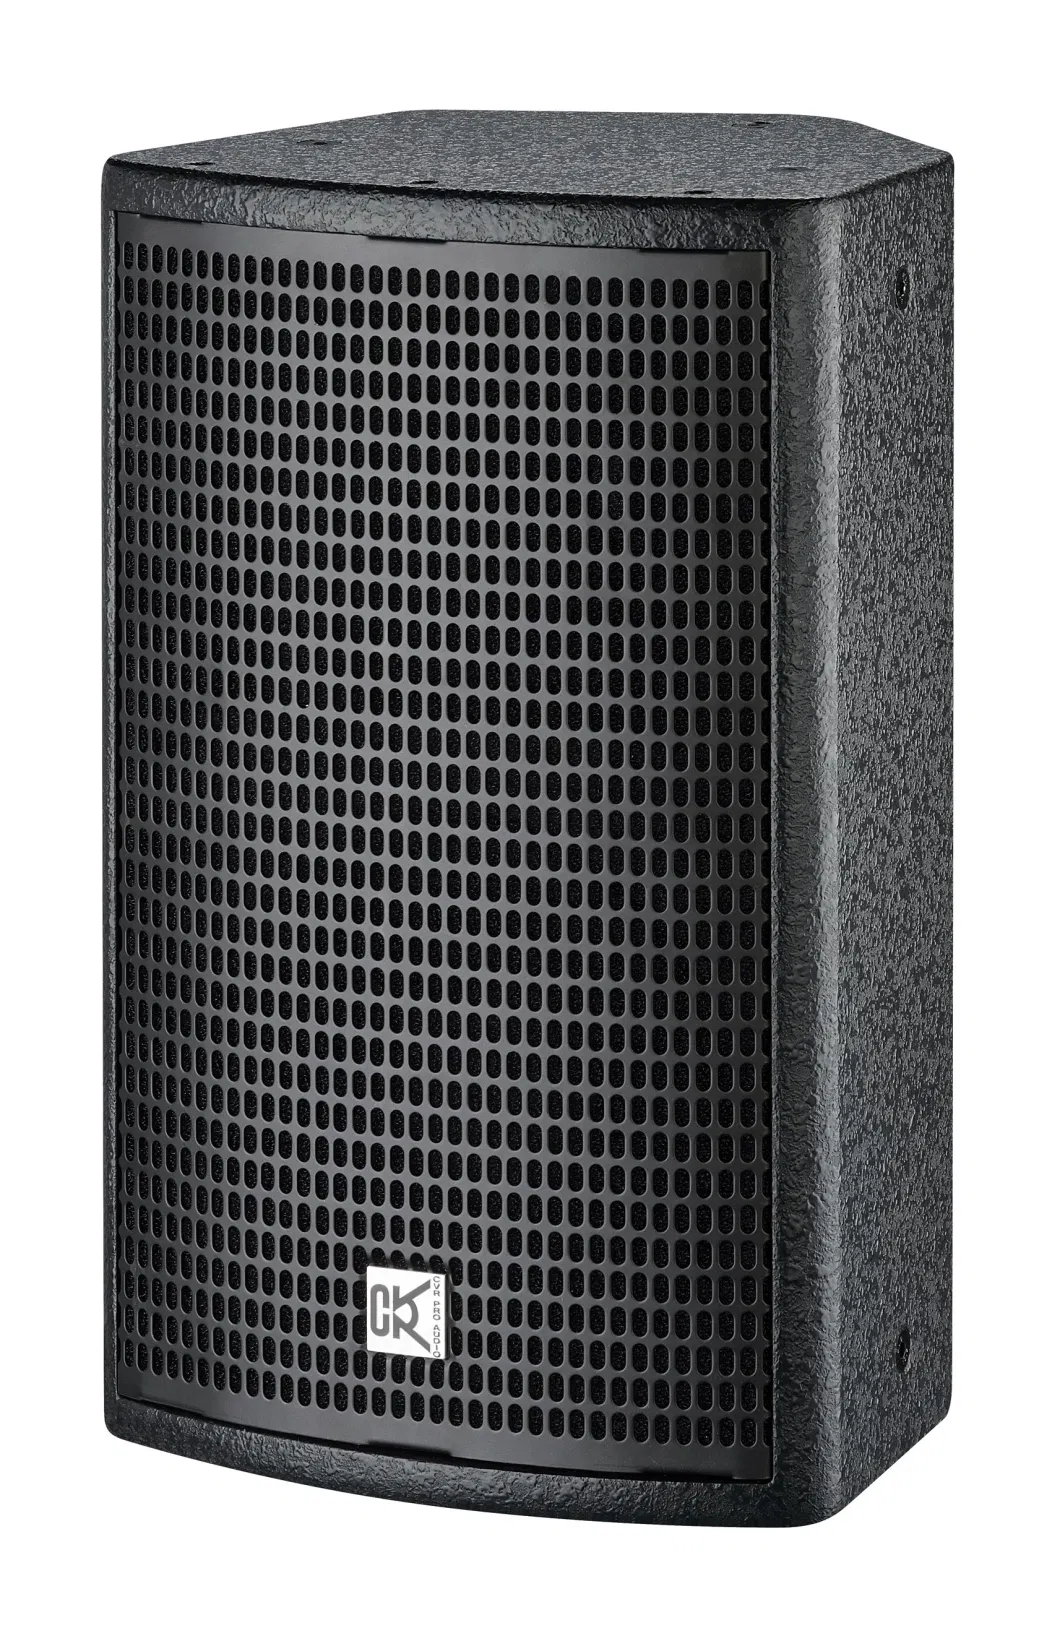 PA Sound Box Active Vented Full Range Coaxical System for Stage Indoor Outdoor